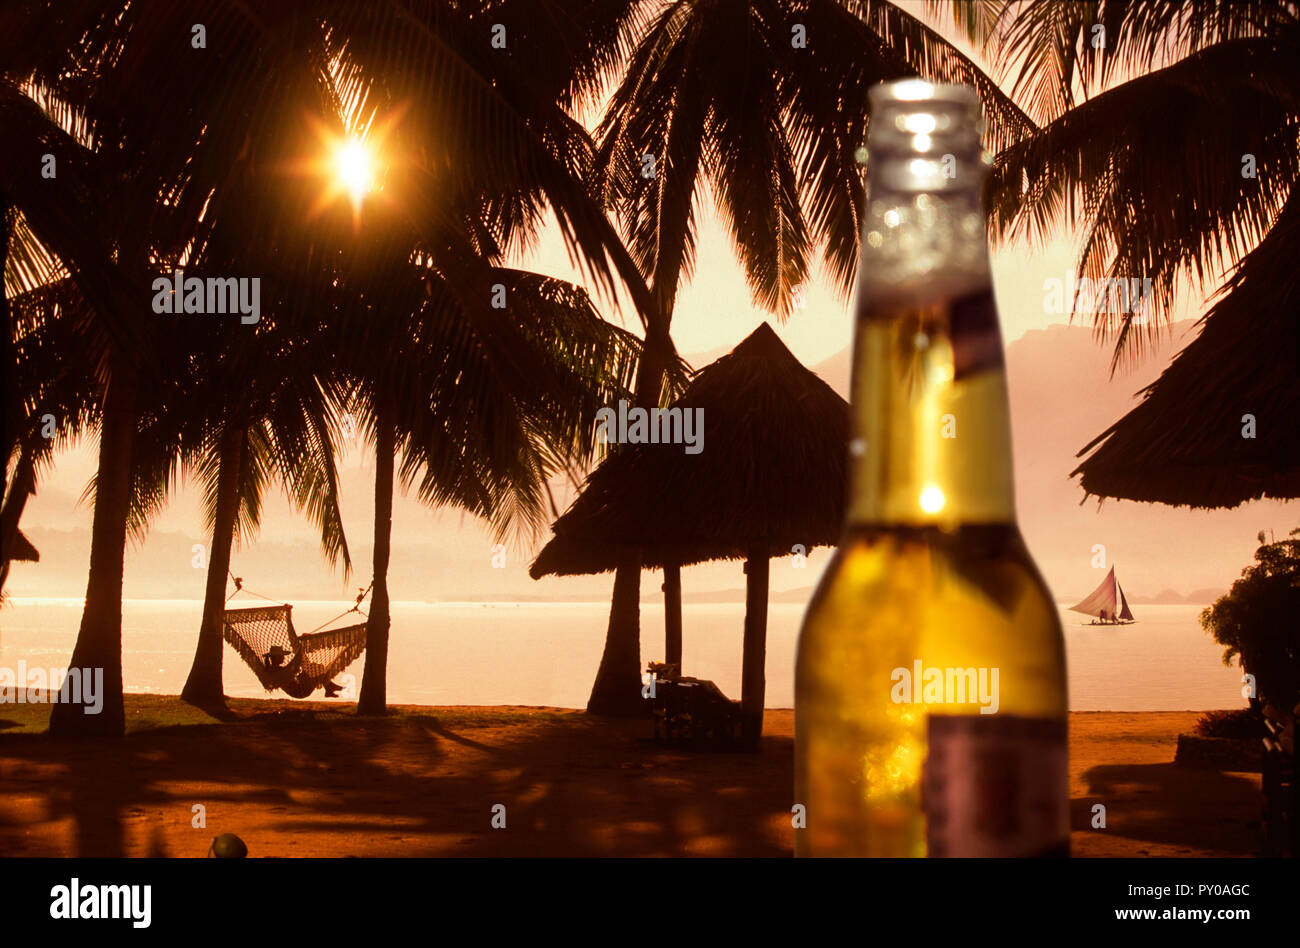 Beer bottle against beach with palm trees and woman in hammock at sunset, Badian, Cebu, Philippines Stock Photo